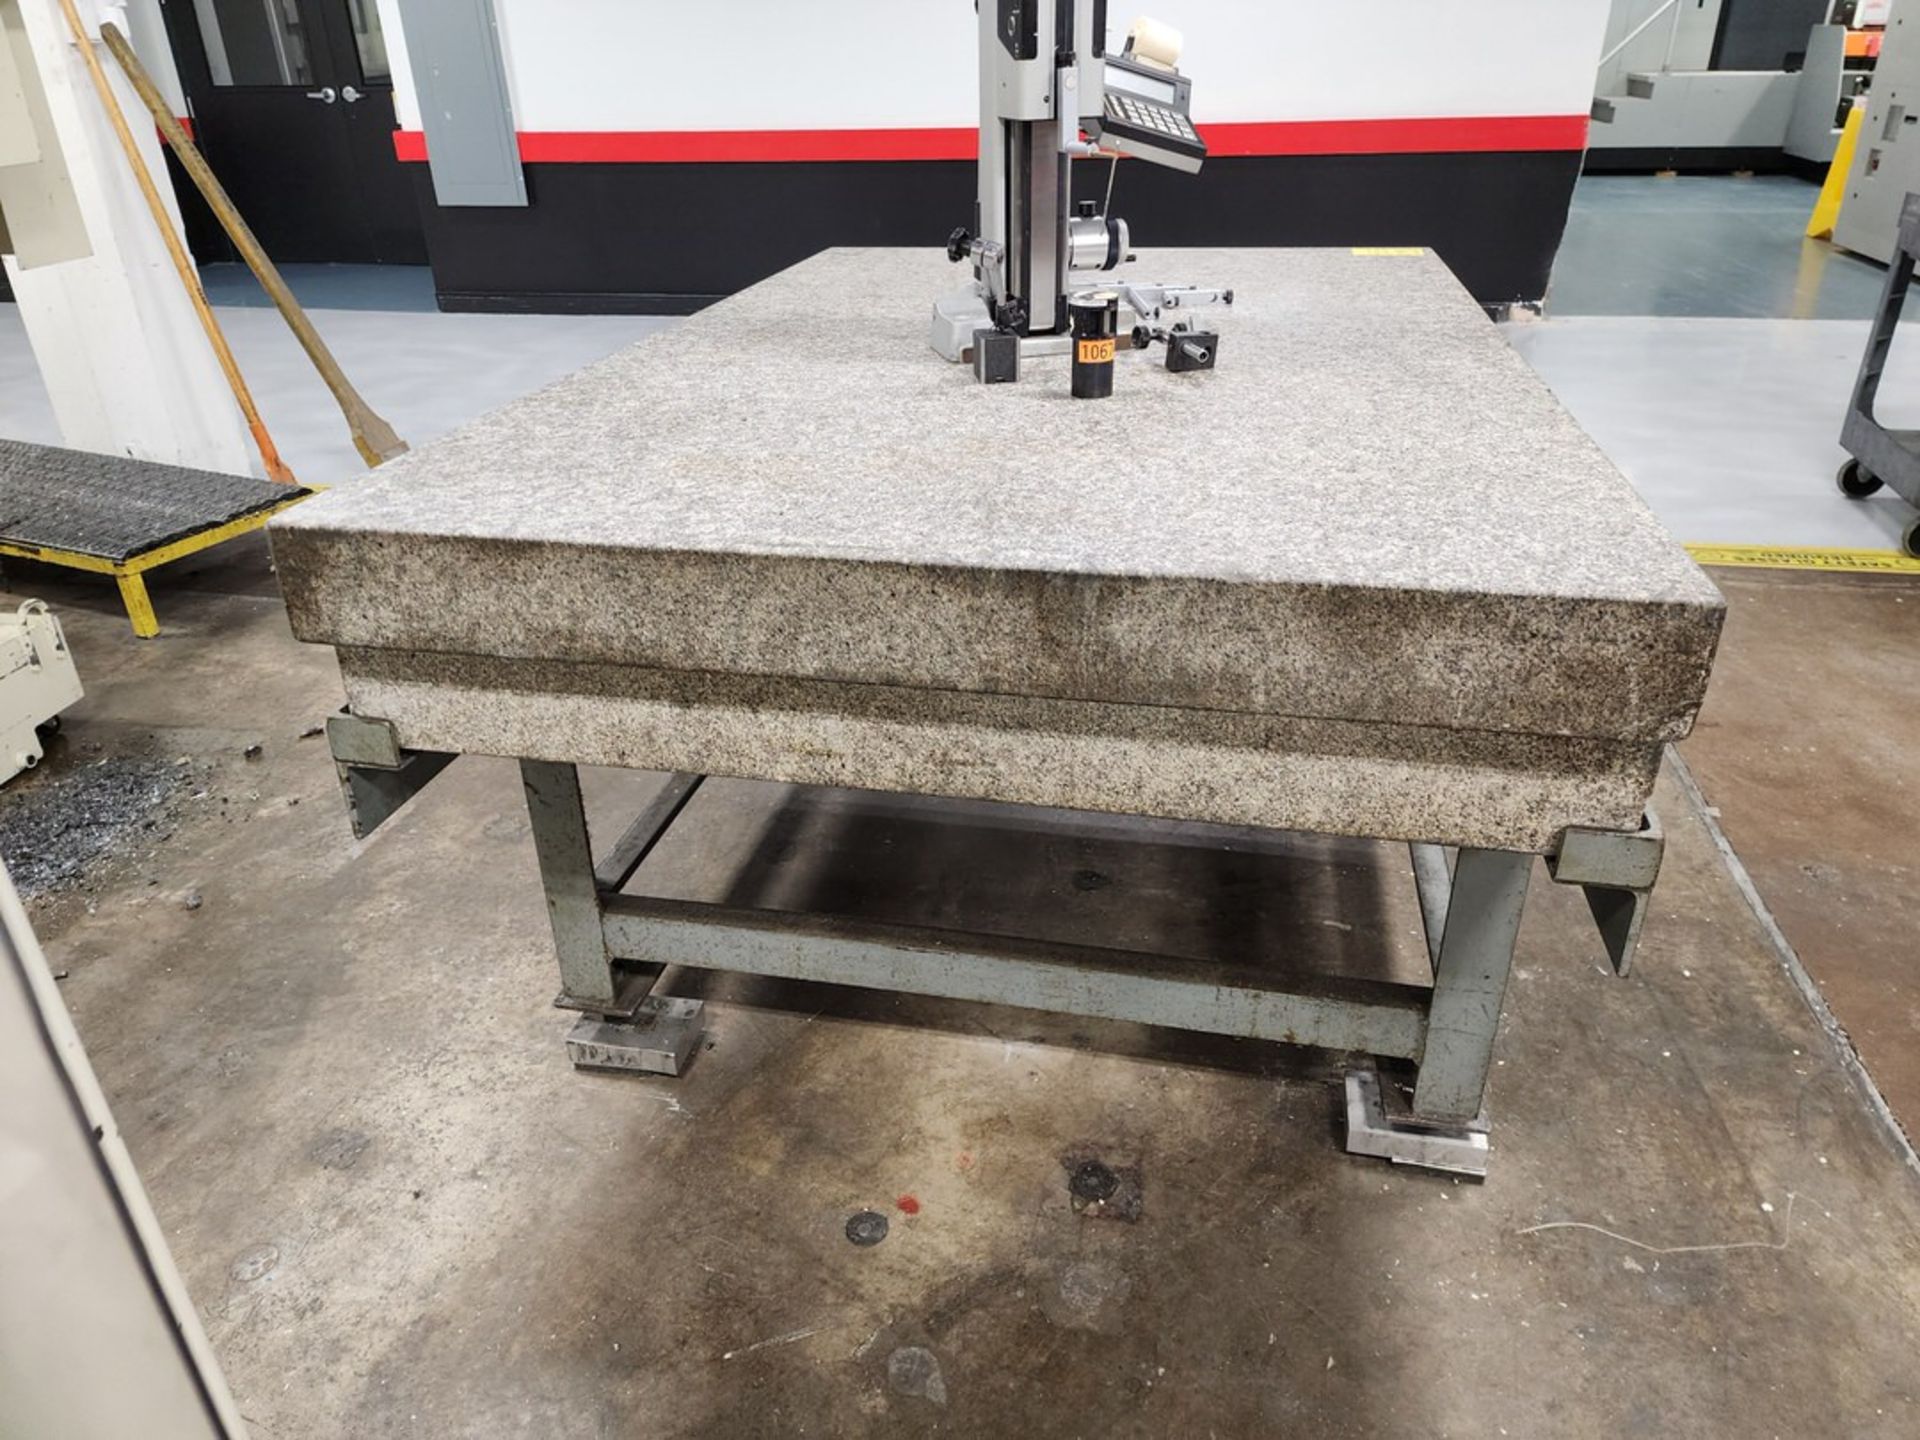 Surface Granite Plate W/ Stand 72"x48" - Image 3 of 5